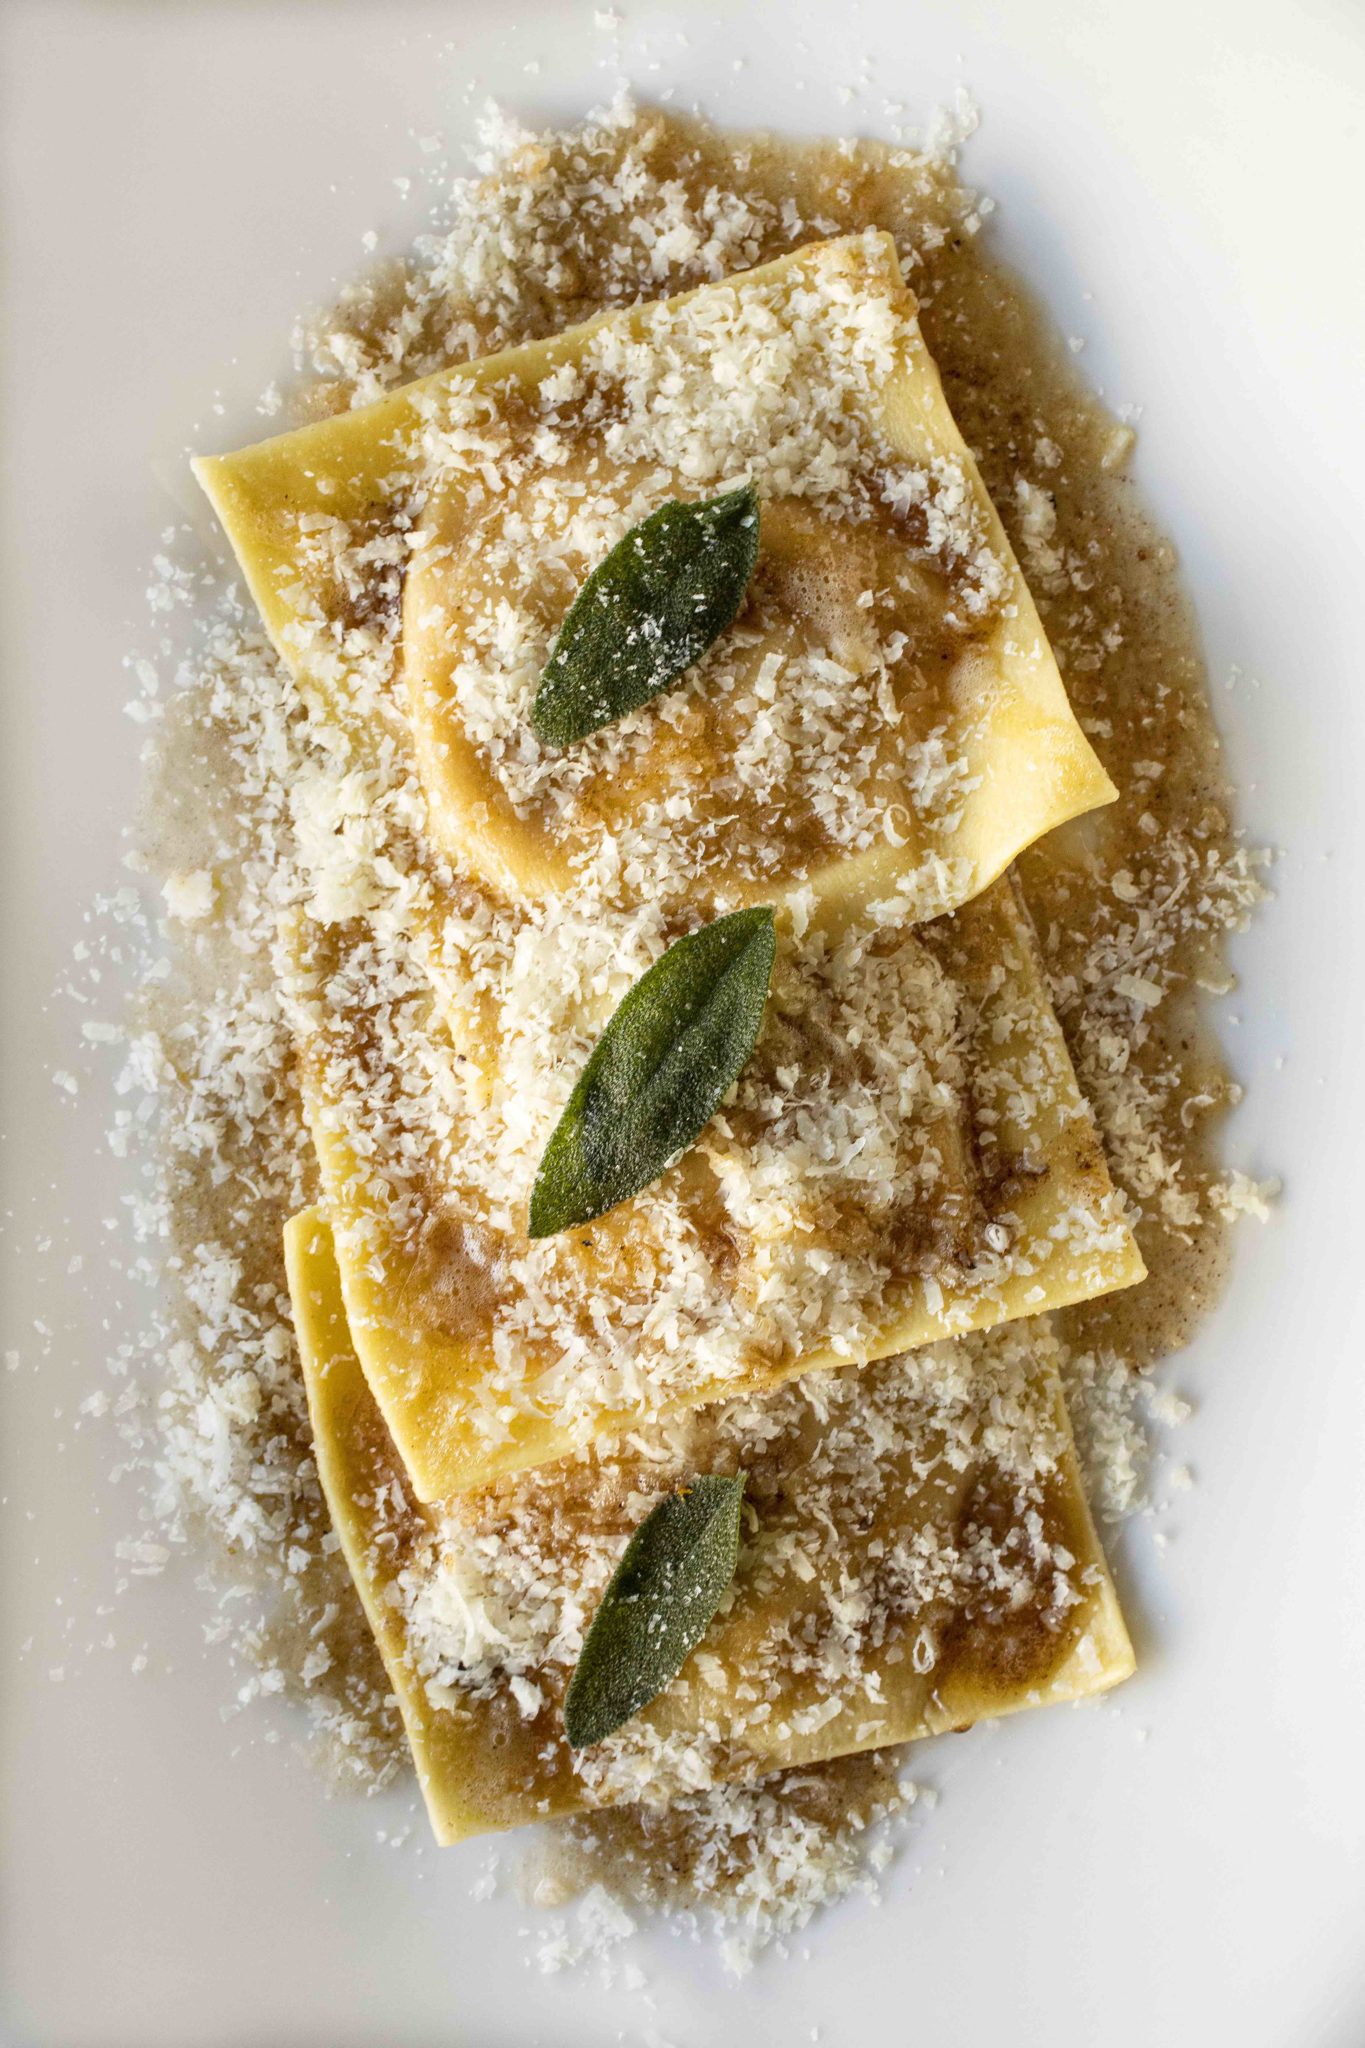 Butternut Ravioli with toasted sage butter, parmigiano, and walnut gremolata from Flavor Bistro in Sebastopol. (Photo by John Burgess/The Press Democrat)